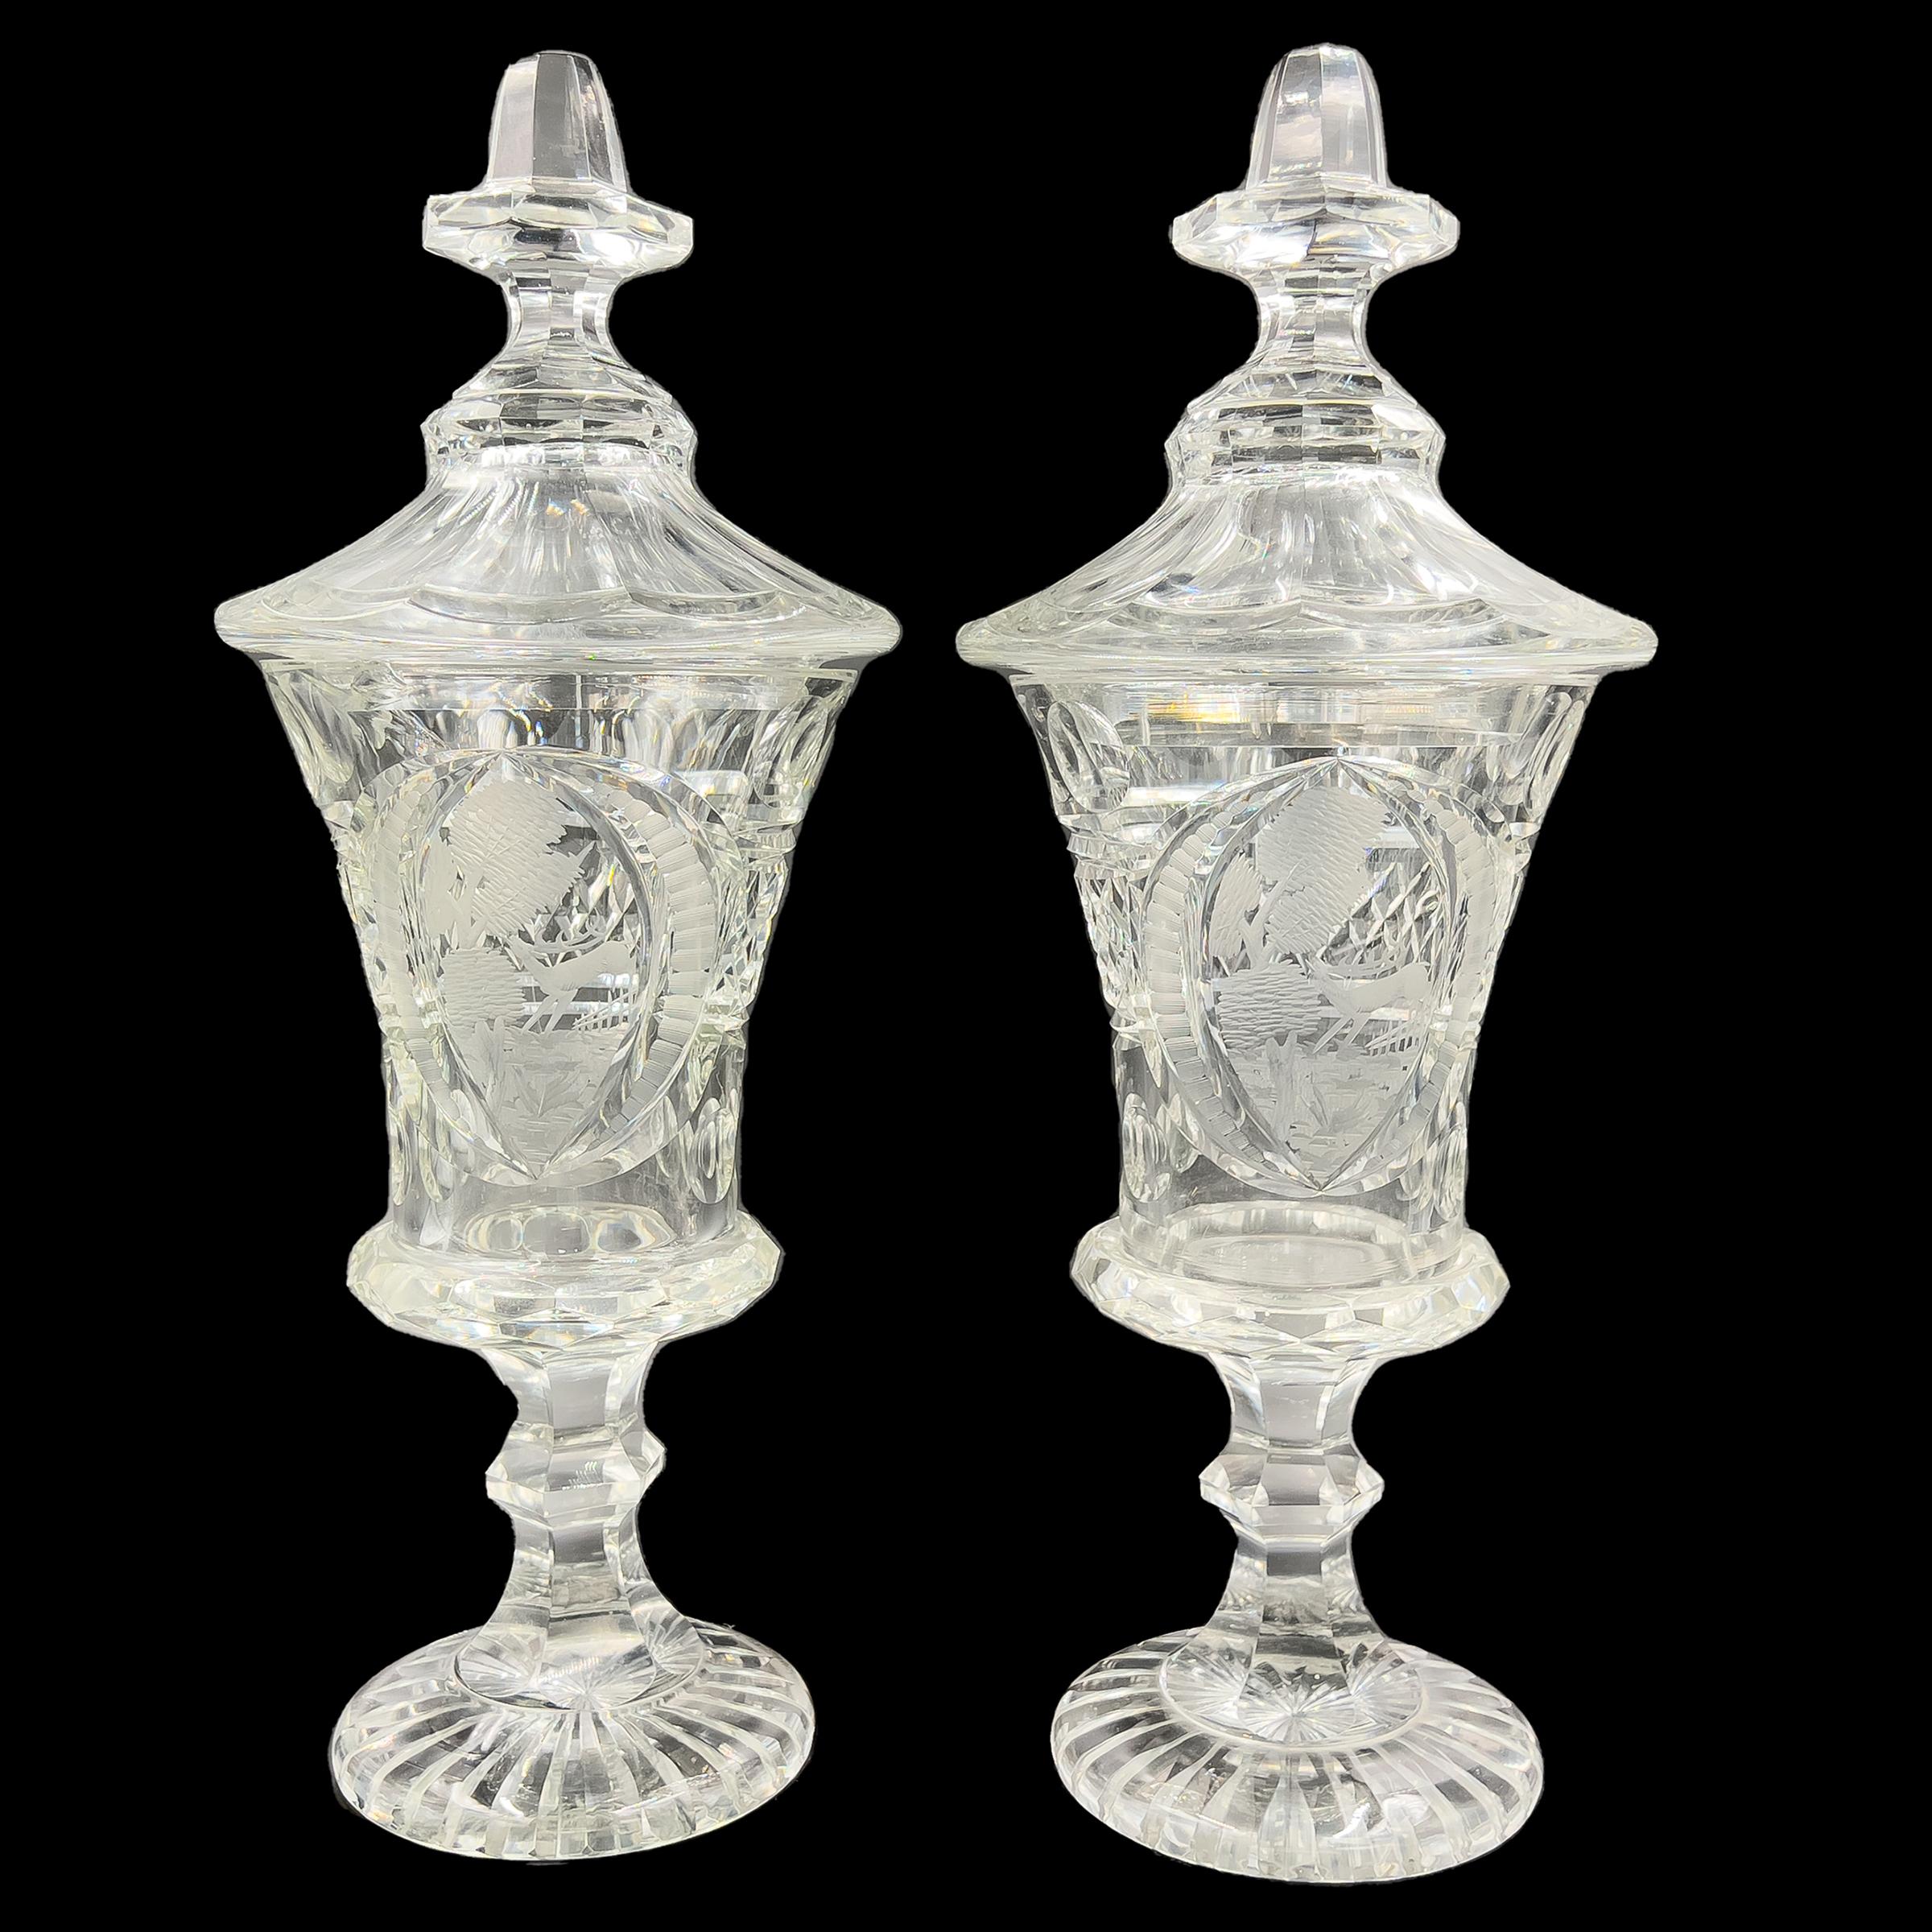 A fine pair of Bohemian clear cut glass vases, Each with a flaring domed lid surmounted by a octagonal finial, scenes of wildlife through a landscape, Raised on a hexagonal knobbed stem ending on a circular foot.
 